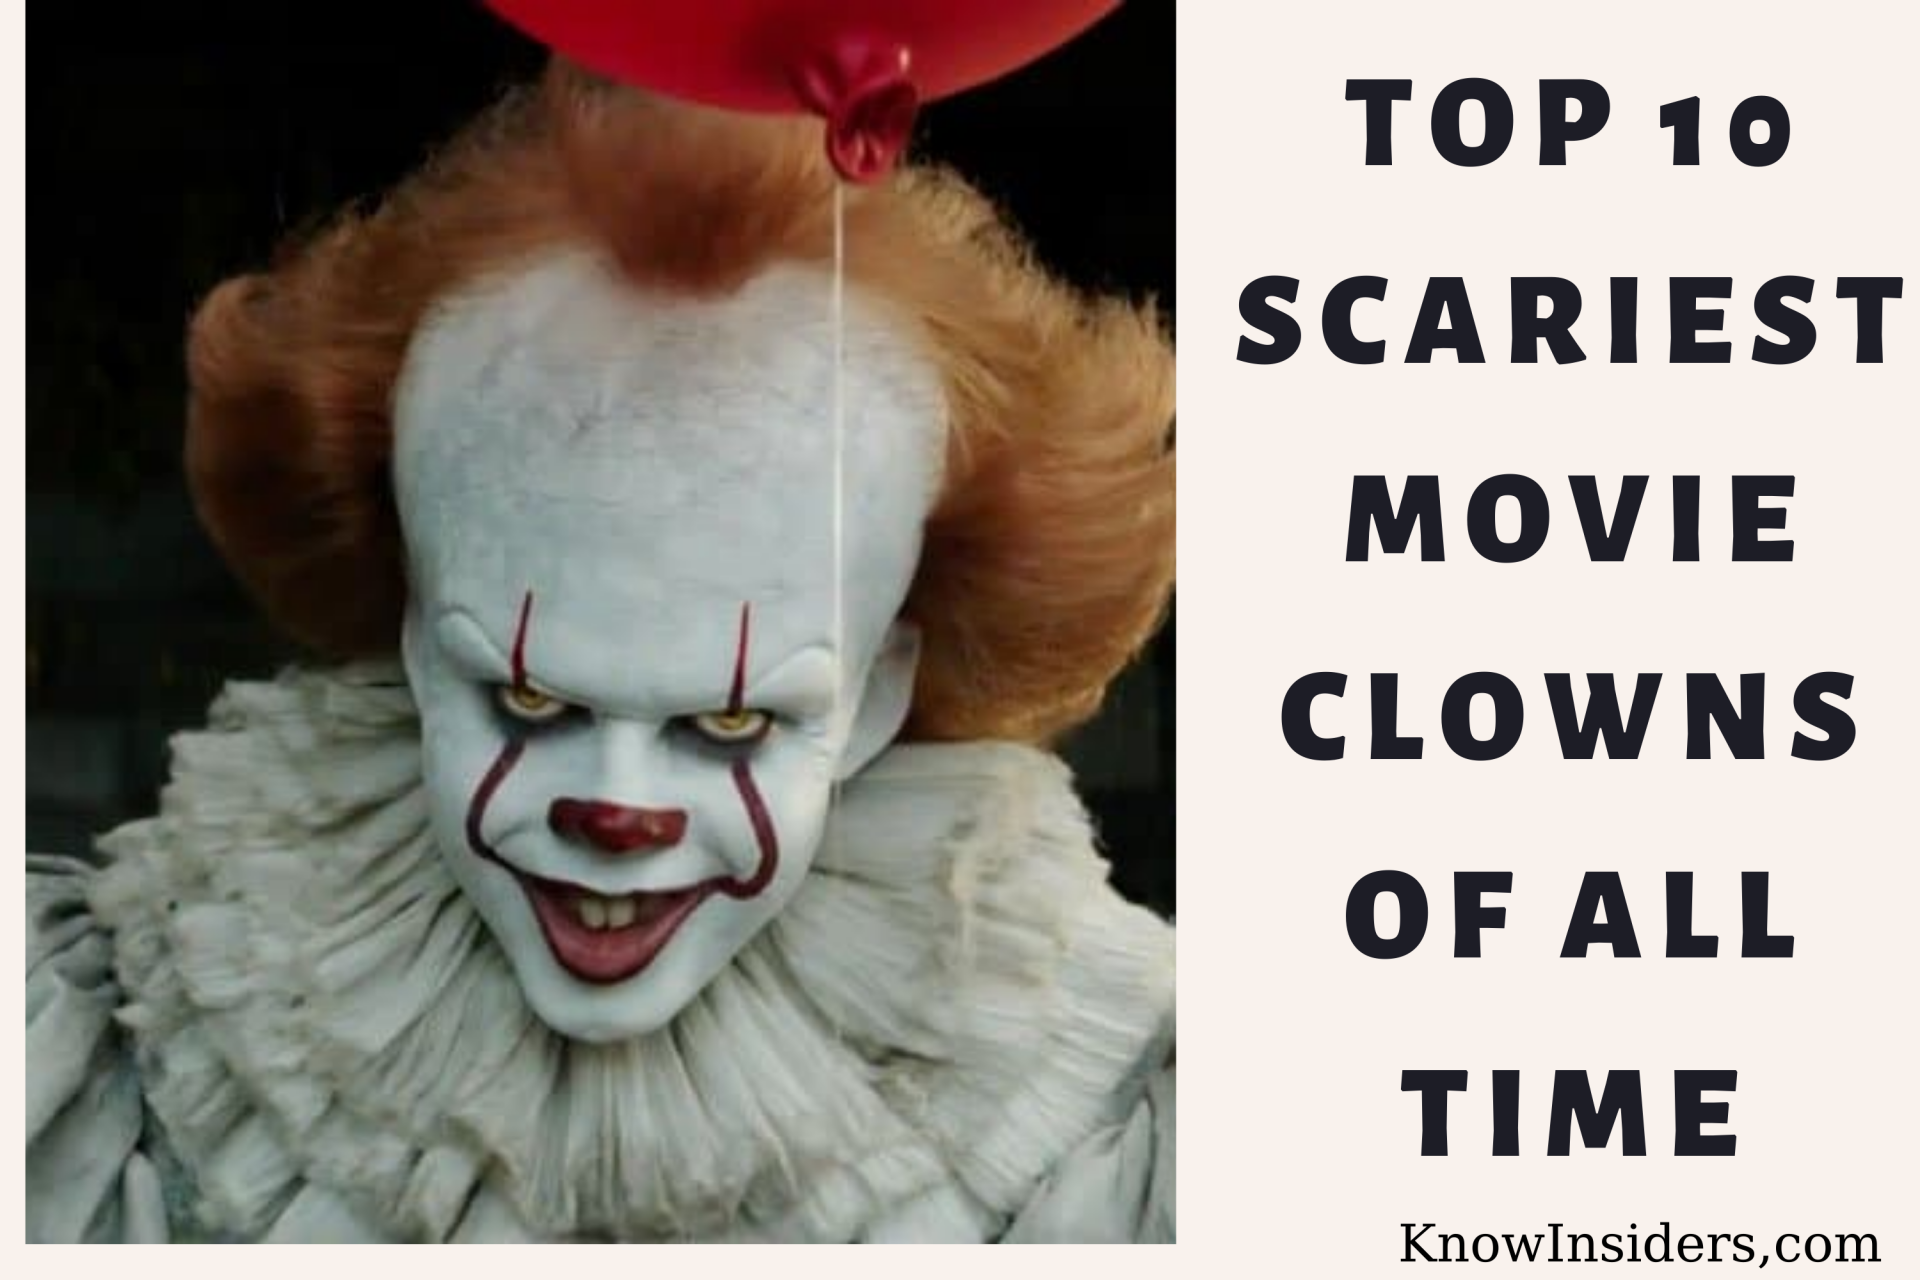 Top 10 Scariest Movie Clowns Of All Time